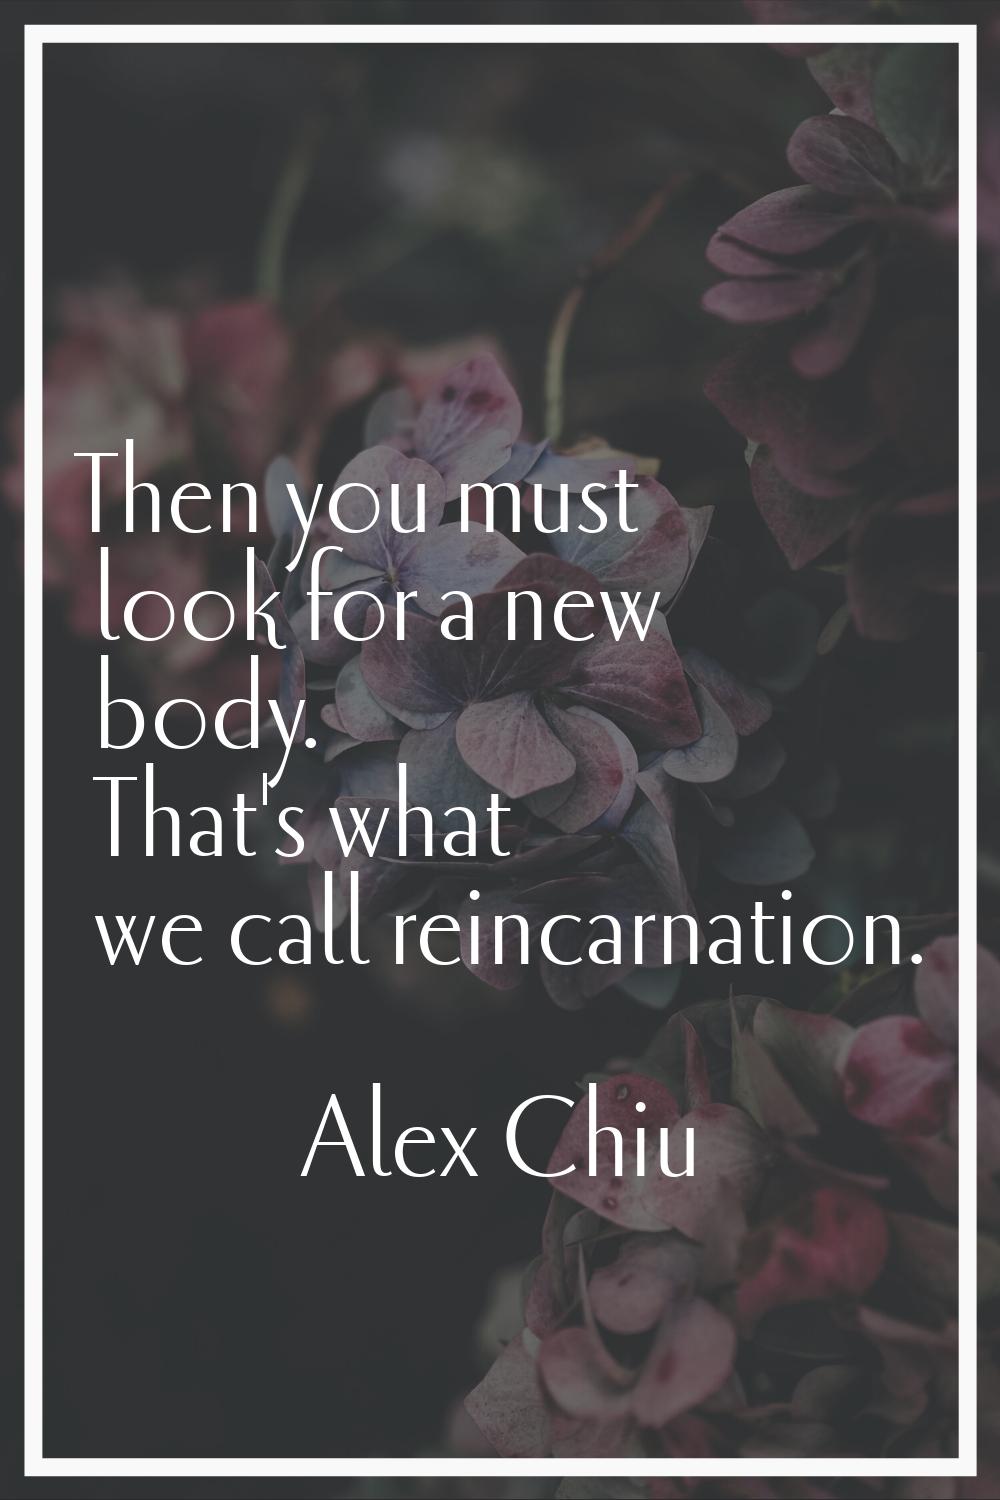 Then you must look for a new body. That's what we call reincarnation.